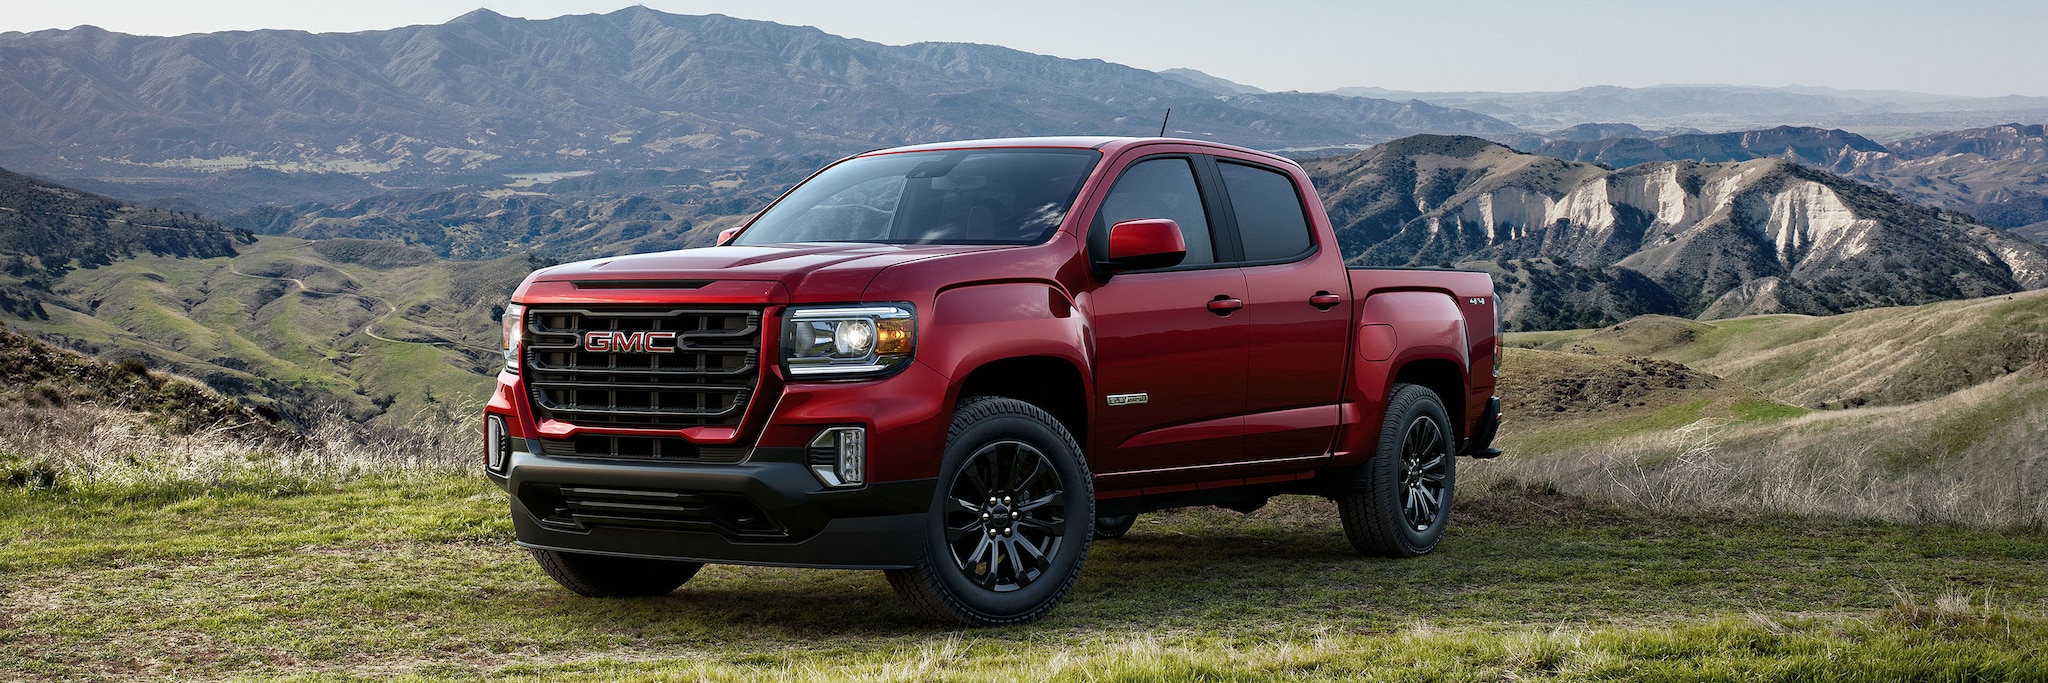 2021 Gmc Canyon Overview The News Wheel